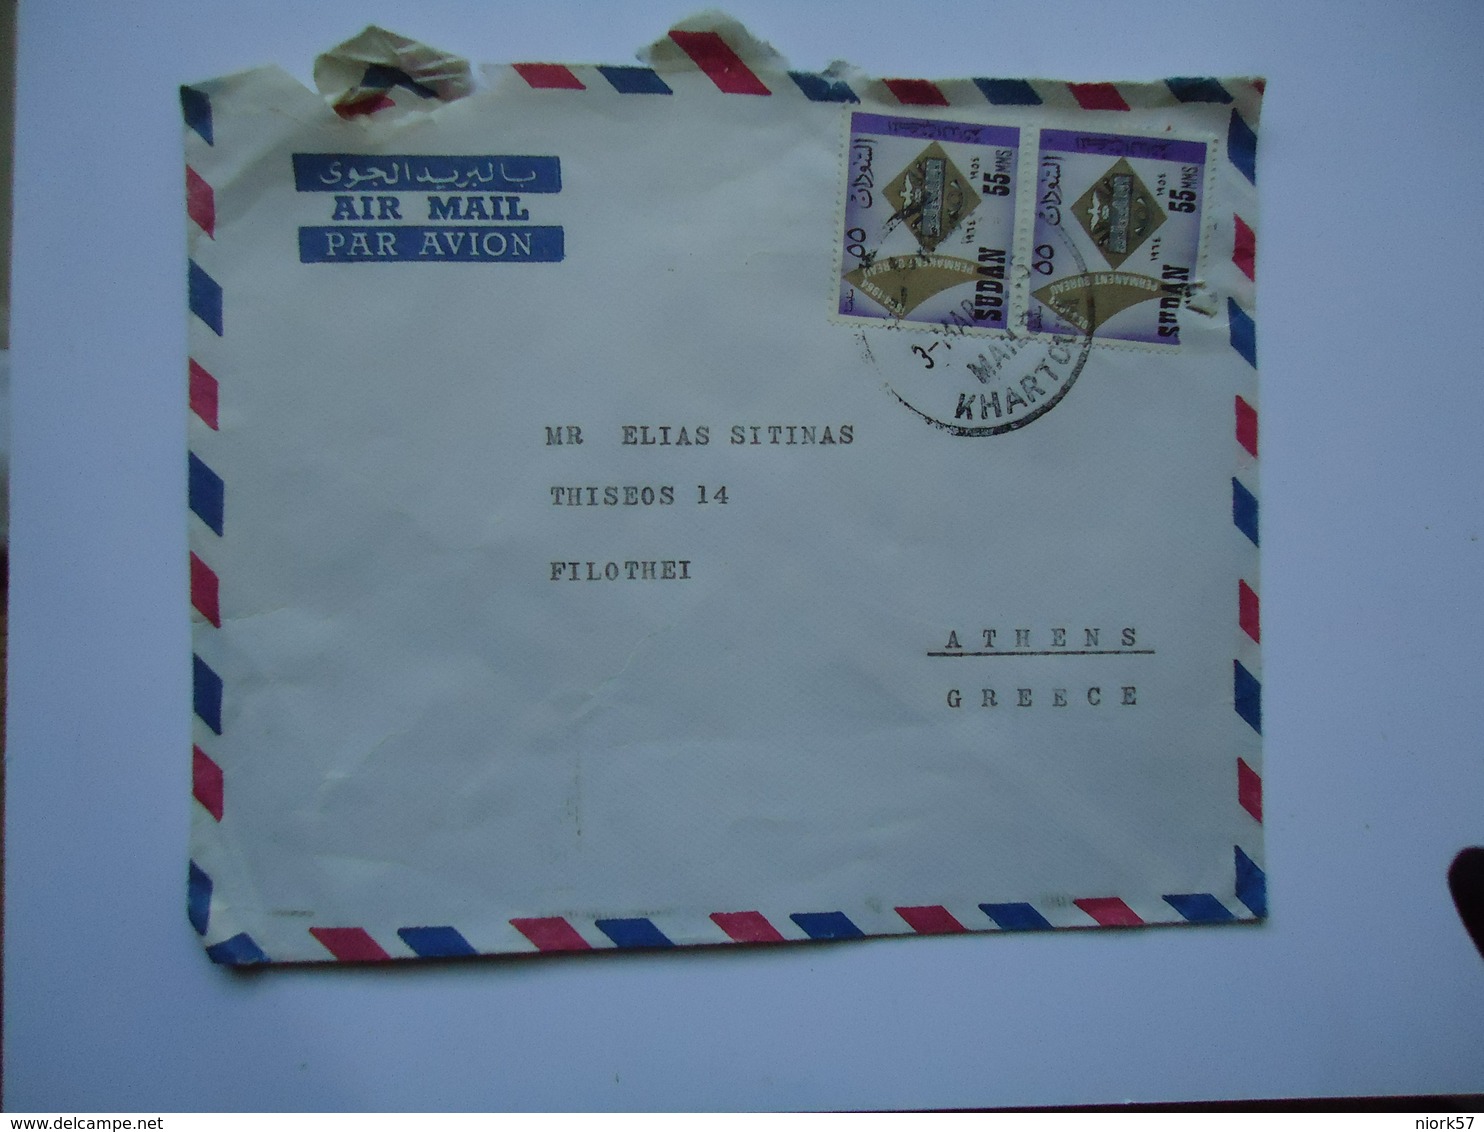 GREECE SUDAN  COVER  1965  WITH POSTMARK POSTED  GREECE ATHENS XALADRION - Maschinenstempel (Werbestempel)